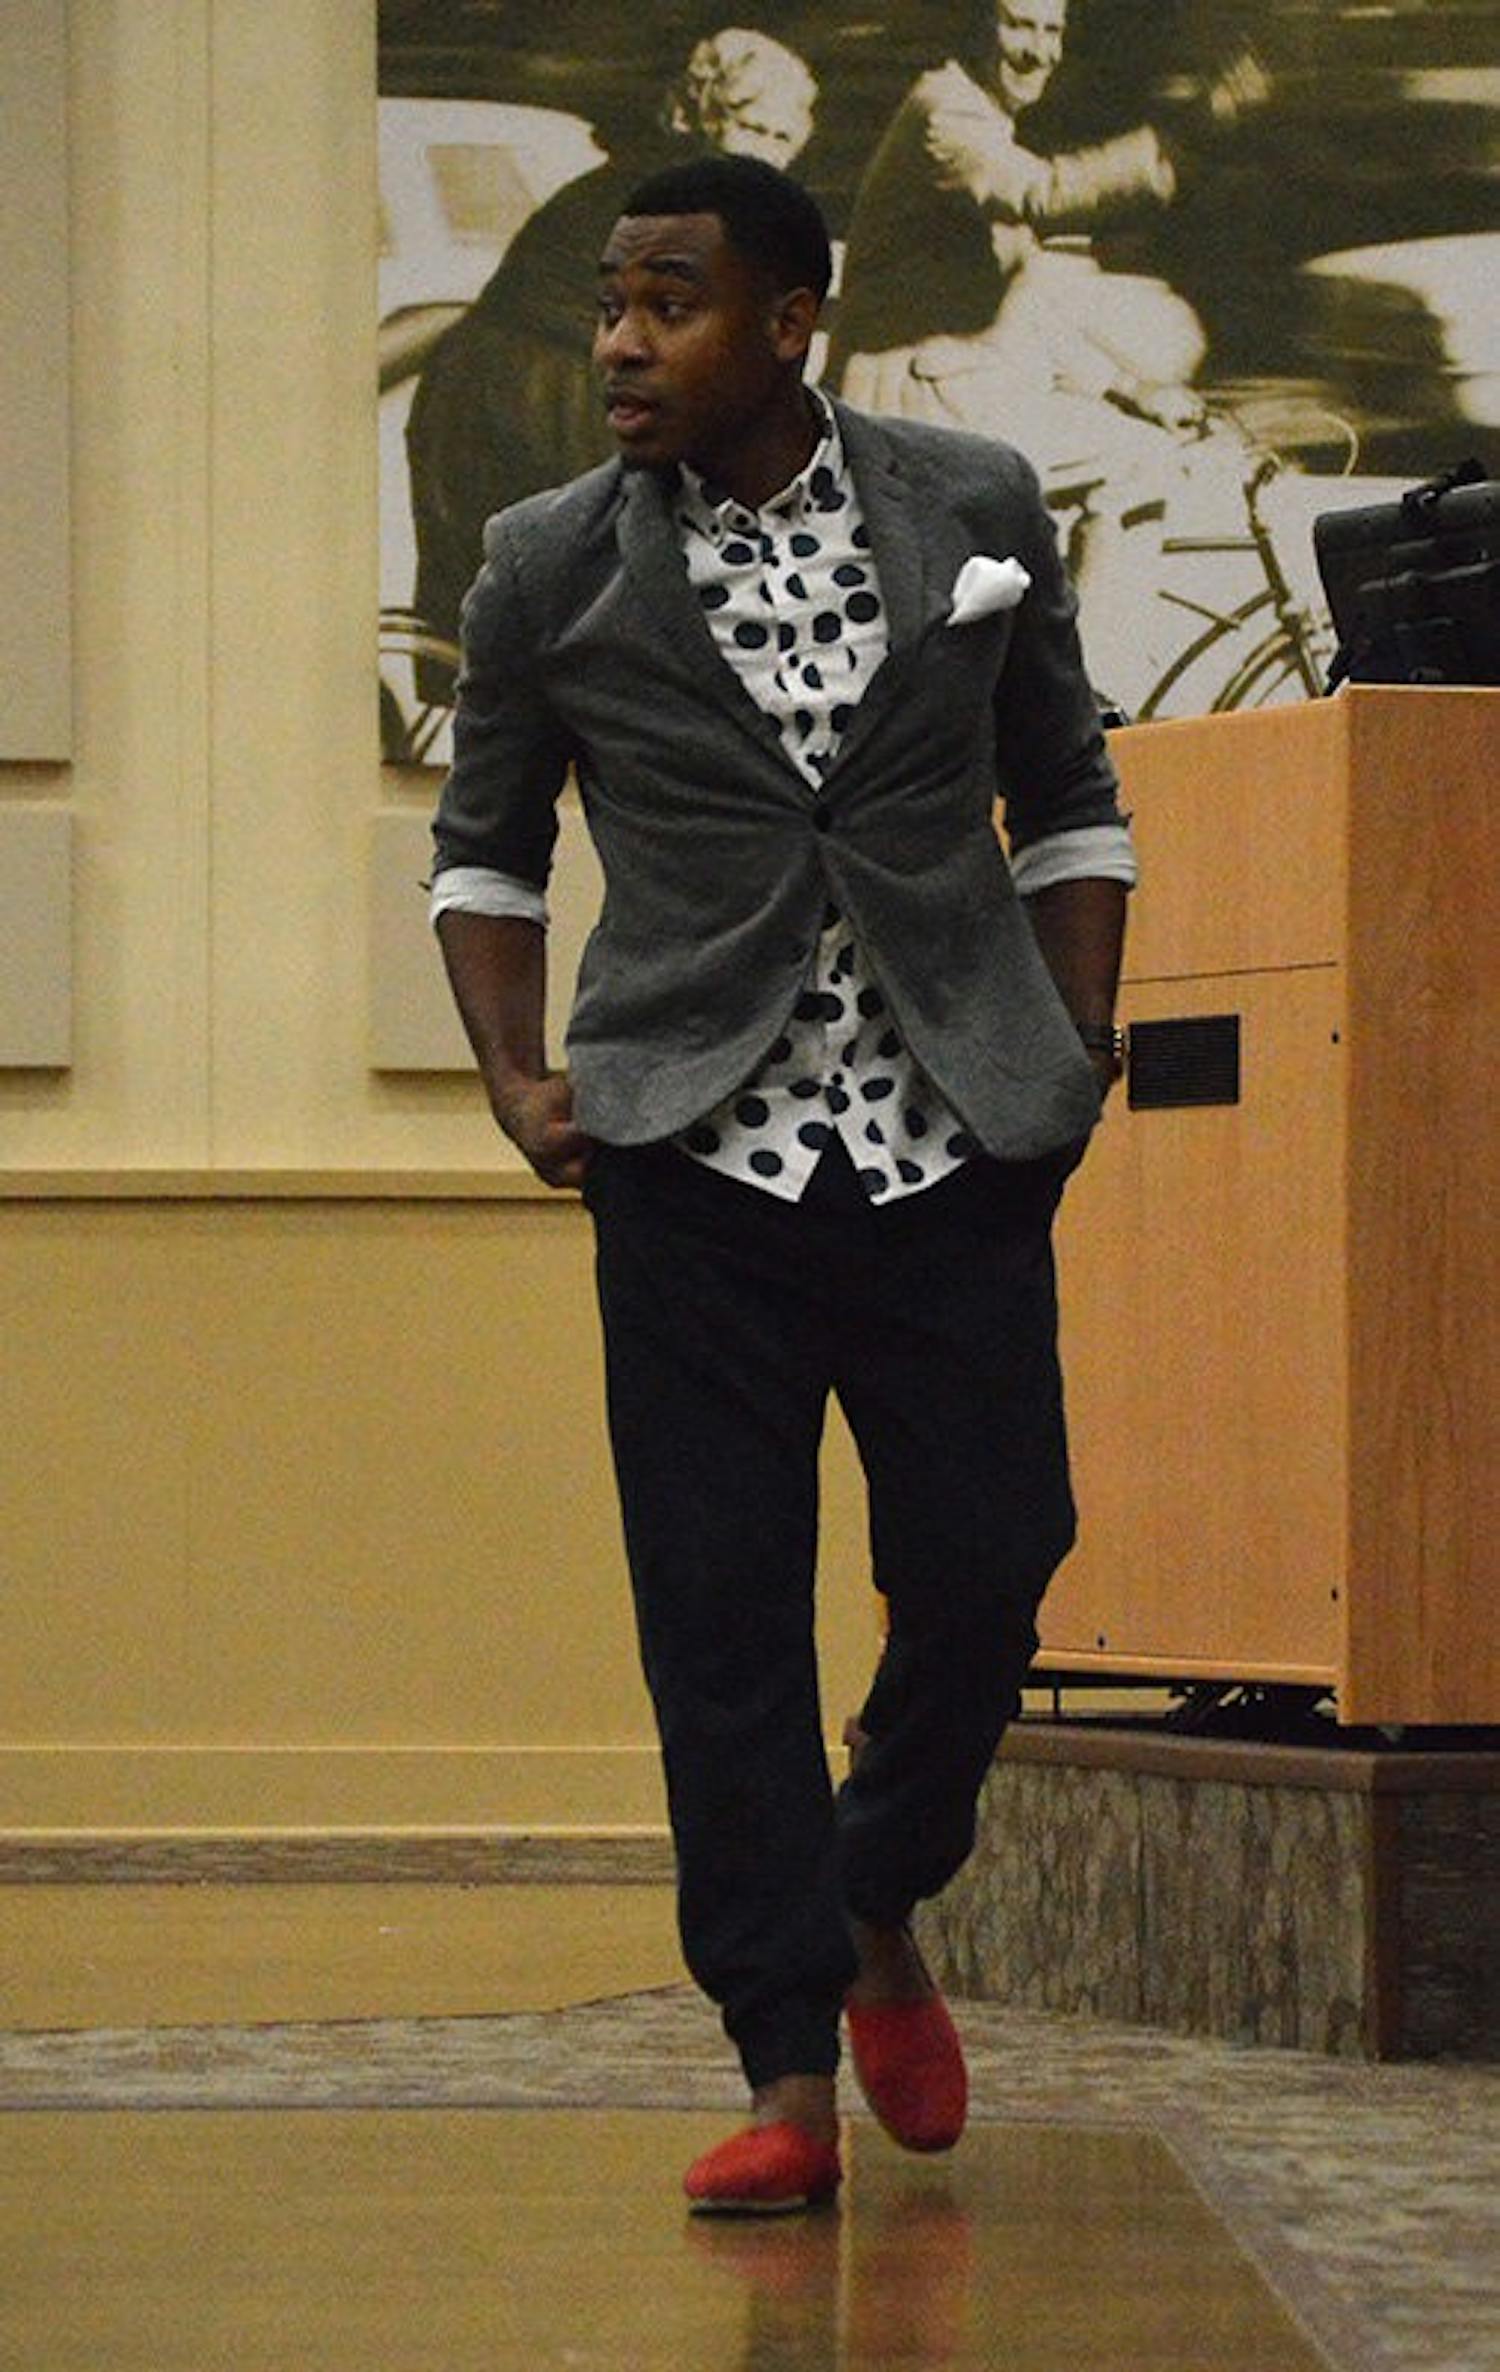 Brandon Whatley models during Kappa Chi's fashion show on Sept 24, 2014. (Emily Enfinger | Assistant Photo Editor)